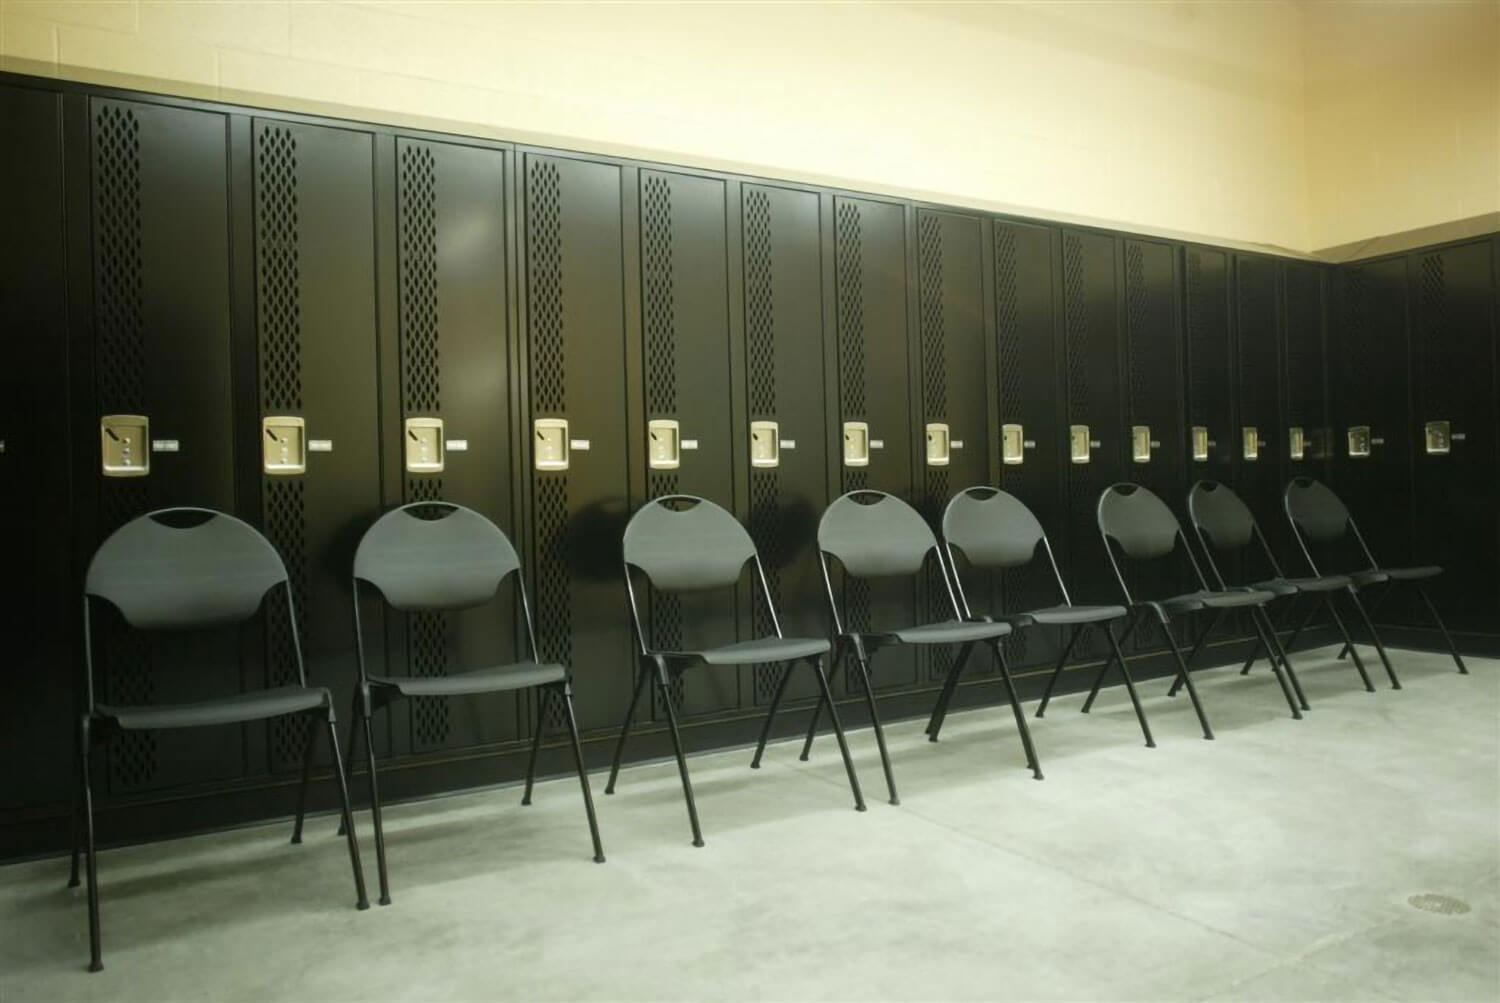 Locker room, folding chairs line up in front of lockers